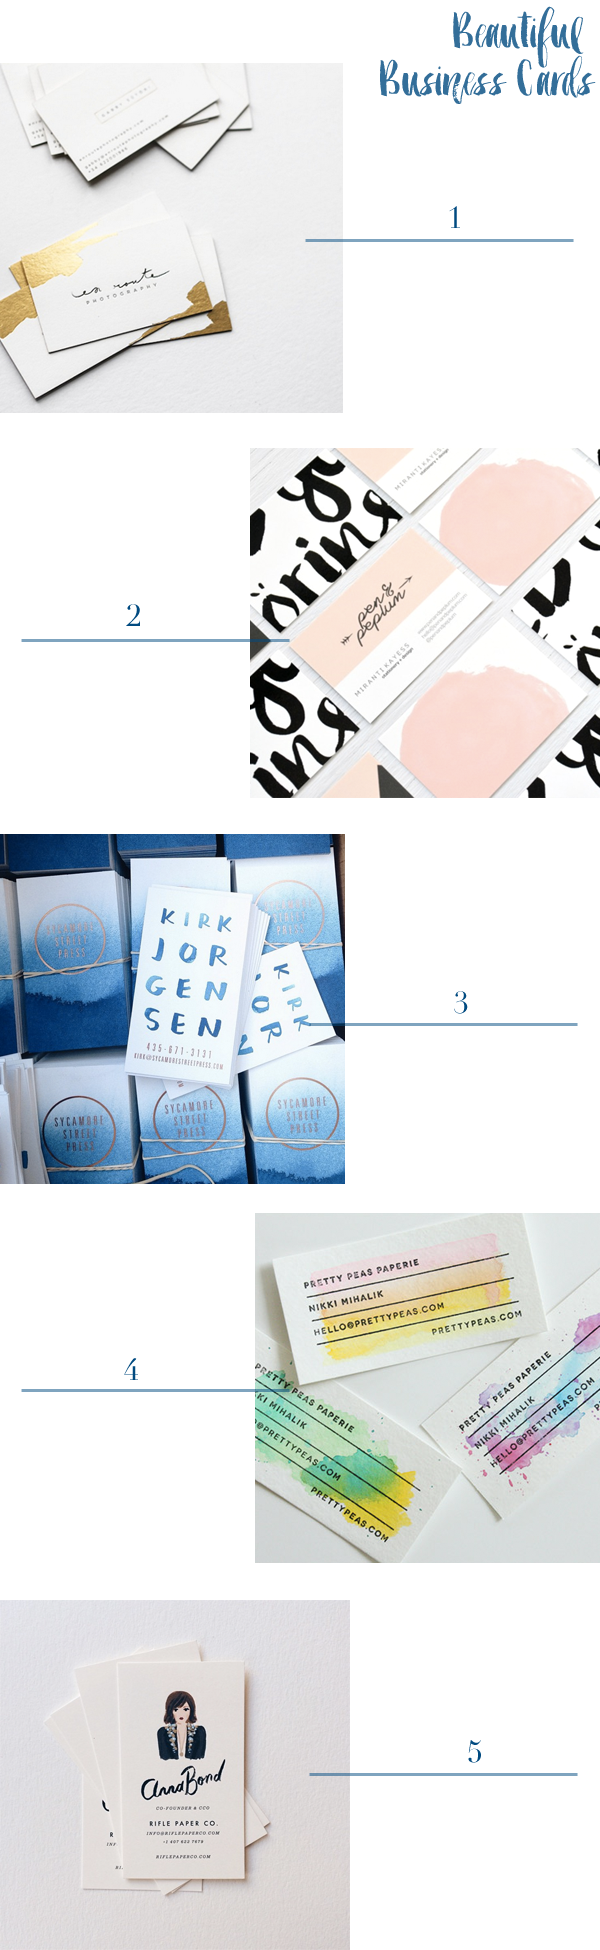 Business Card Inspiration via Oh So Beautiful Paper